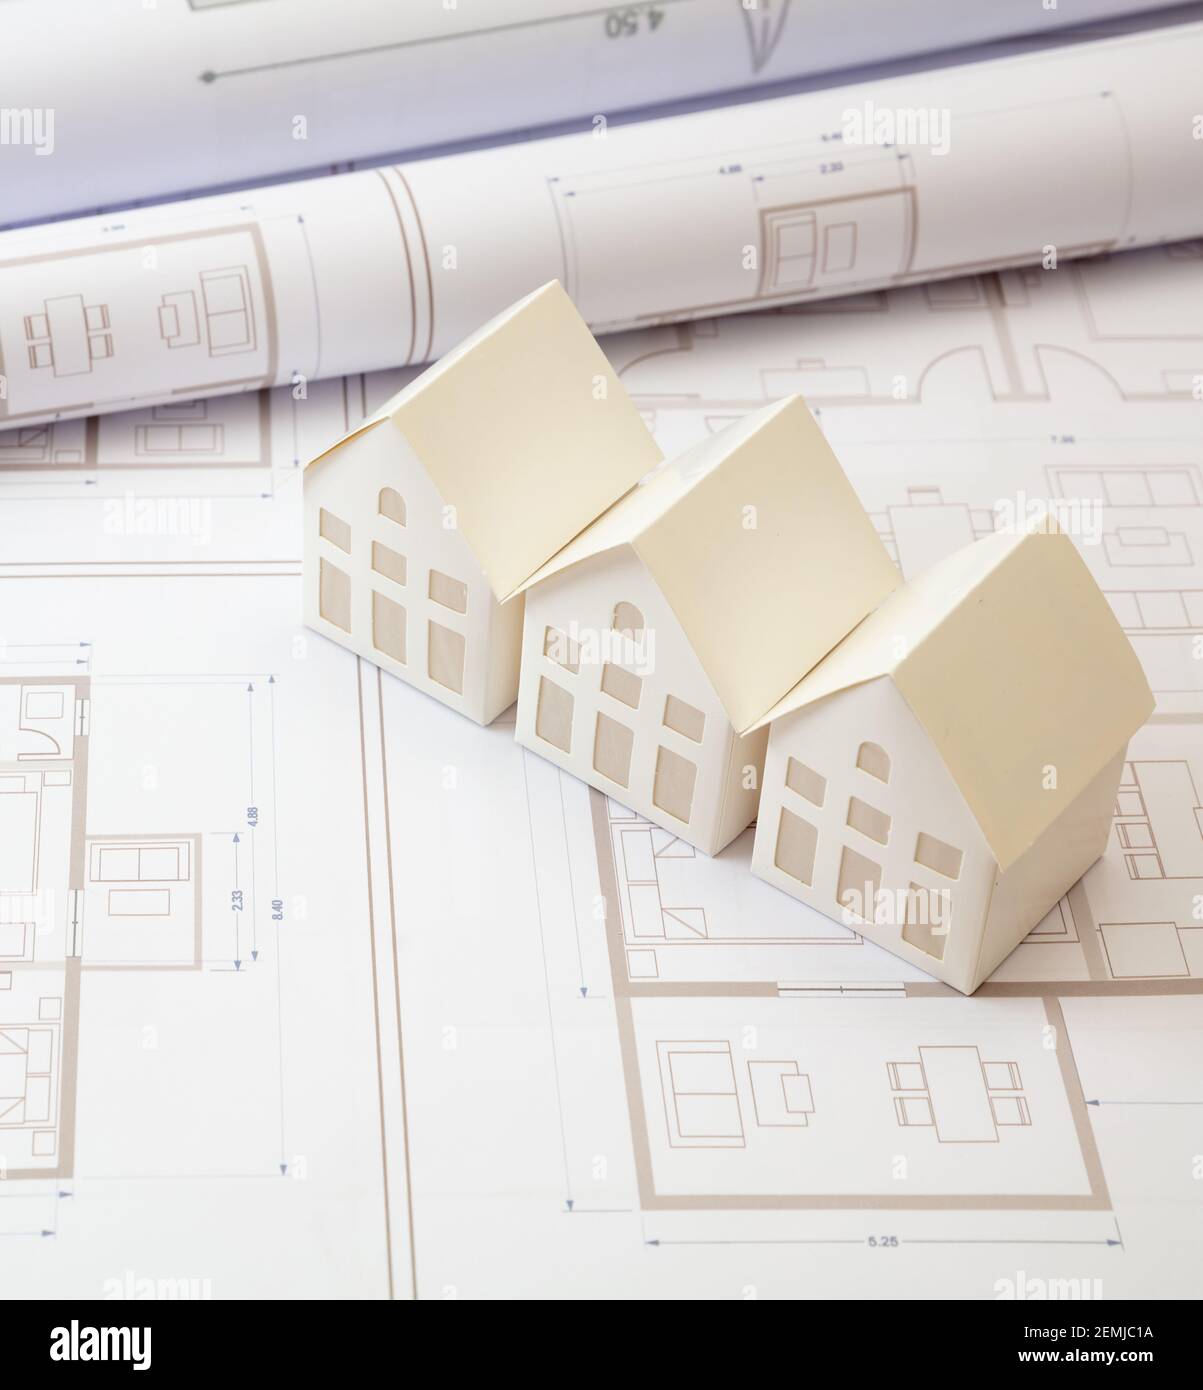 Real estate, construction blueprints concept. Residence complex architectural drawings and detached houses models on an office desk. Architect enginee Stock Photo